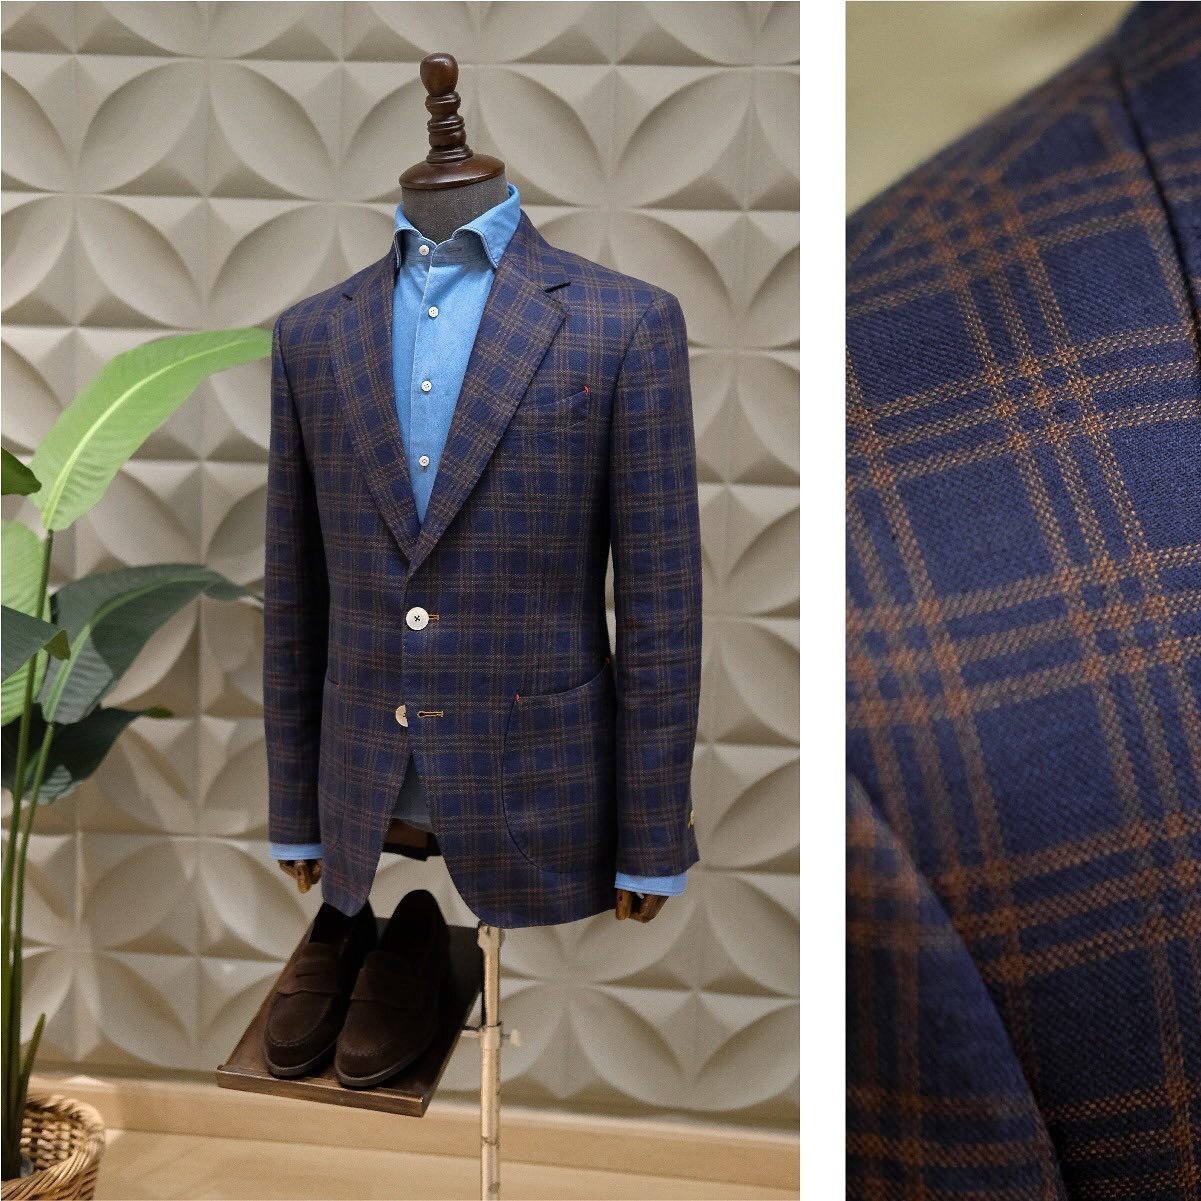 As summer draws to an end, we&rsquo;d like to share some of our most unique pieces from our summer capsule collection of light weight and versatile blazers made from our range of exclusive European linen.

This blazer features a notch lapel with 2 pa